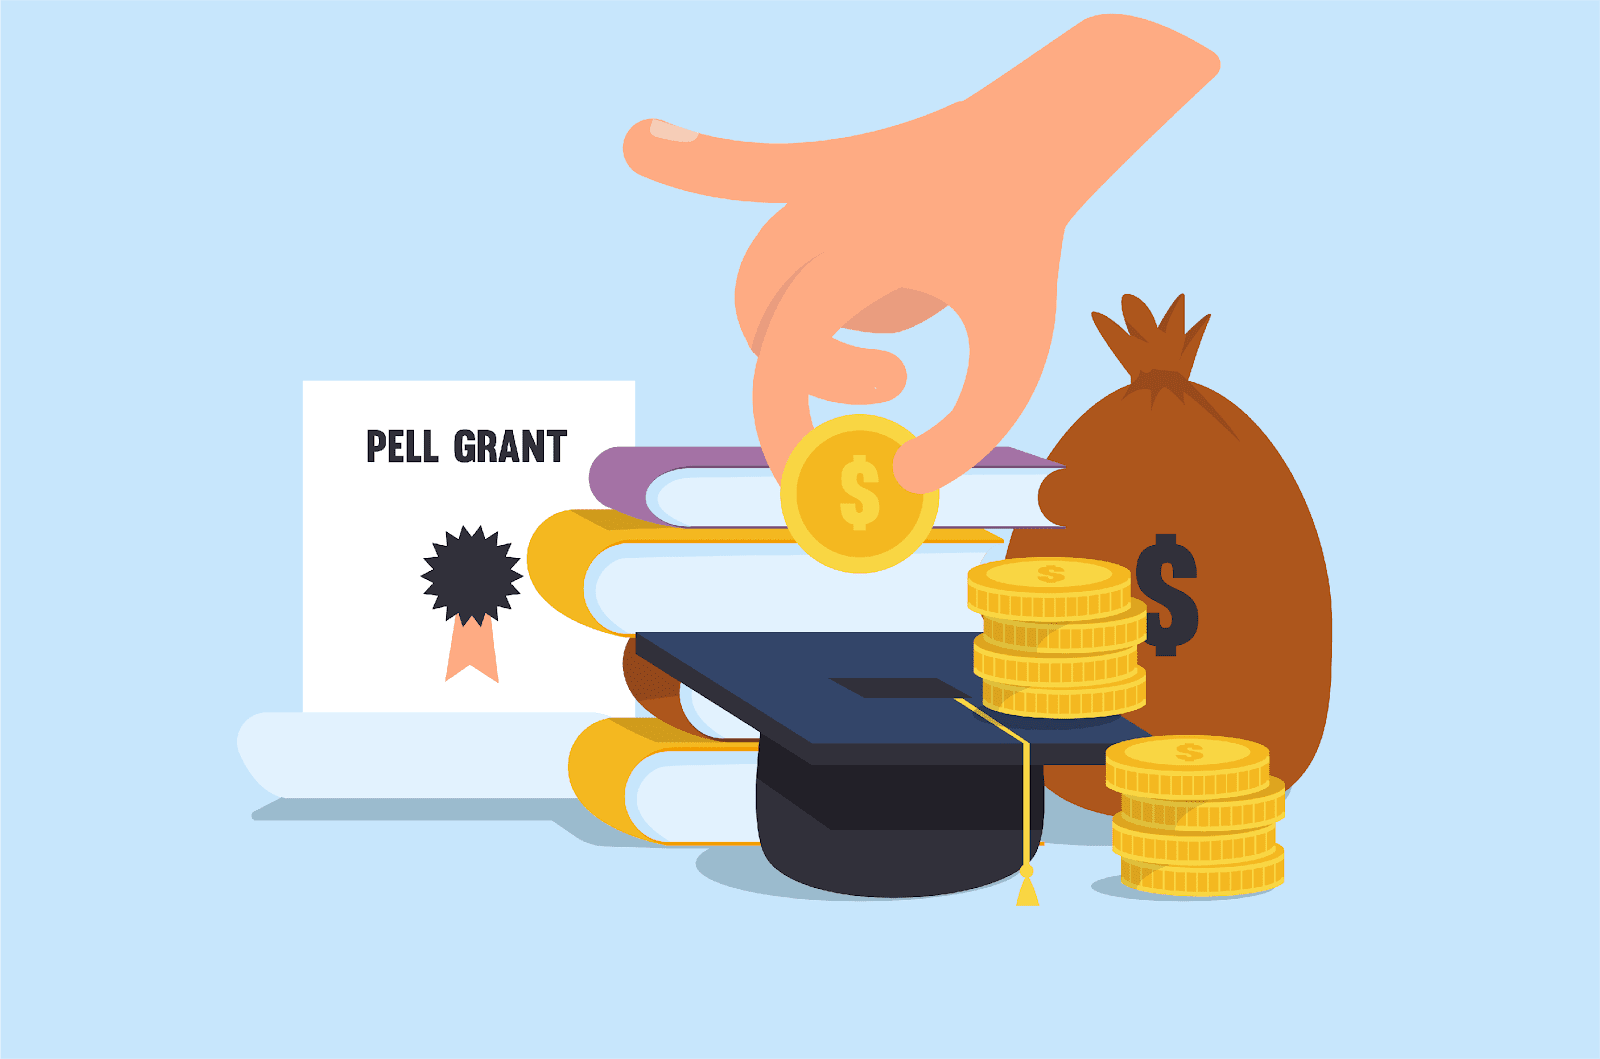 What Is A Pell Grant? (Eligibility And Requirements) - FutureFuel.io